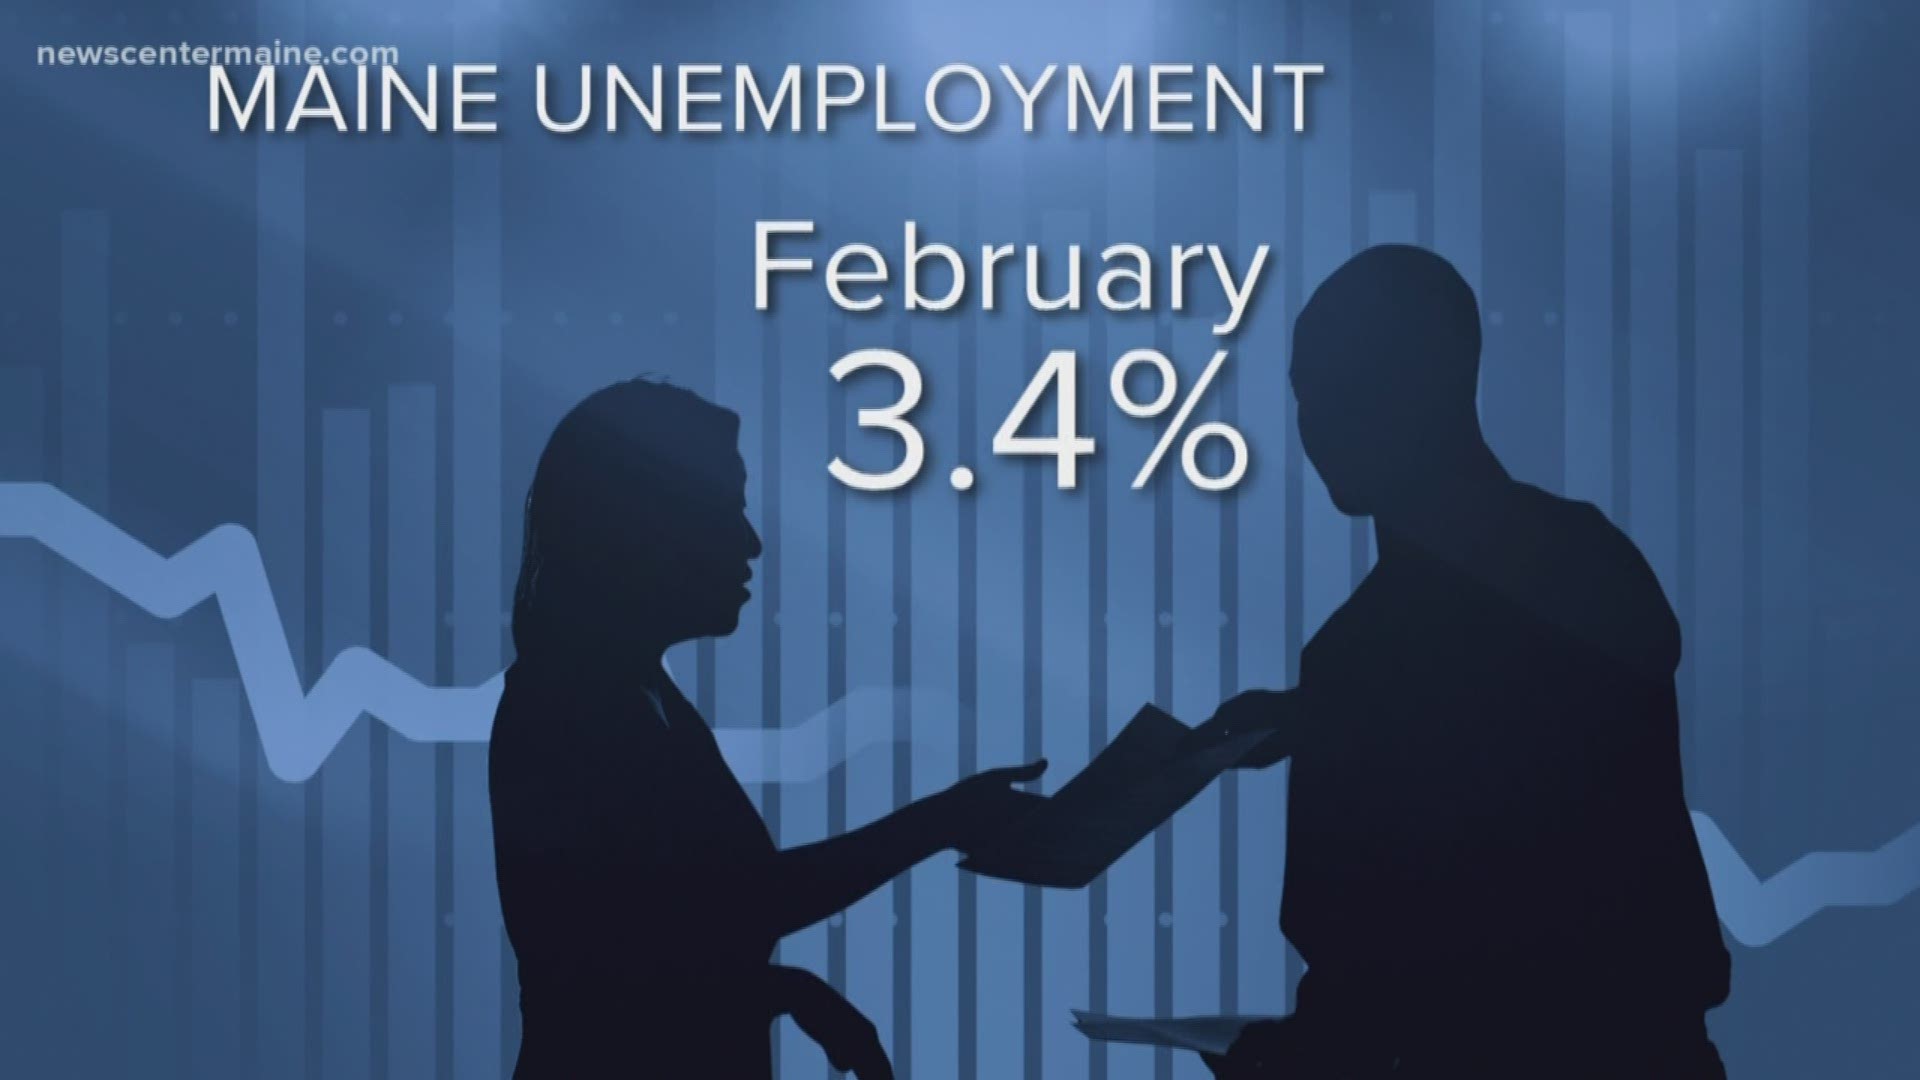 Maine's unemployment rate went down slightly in February.